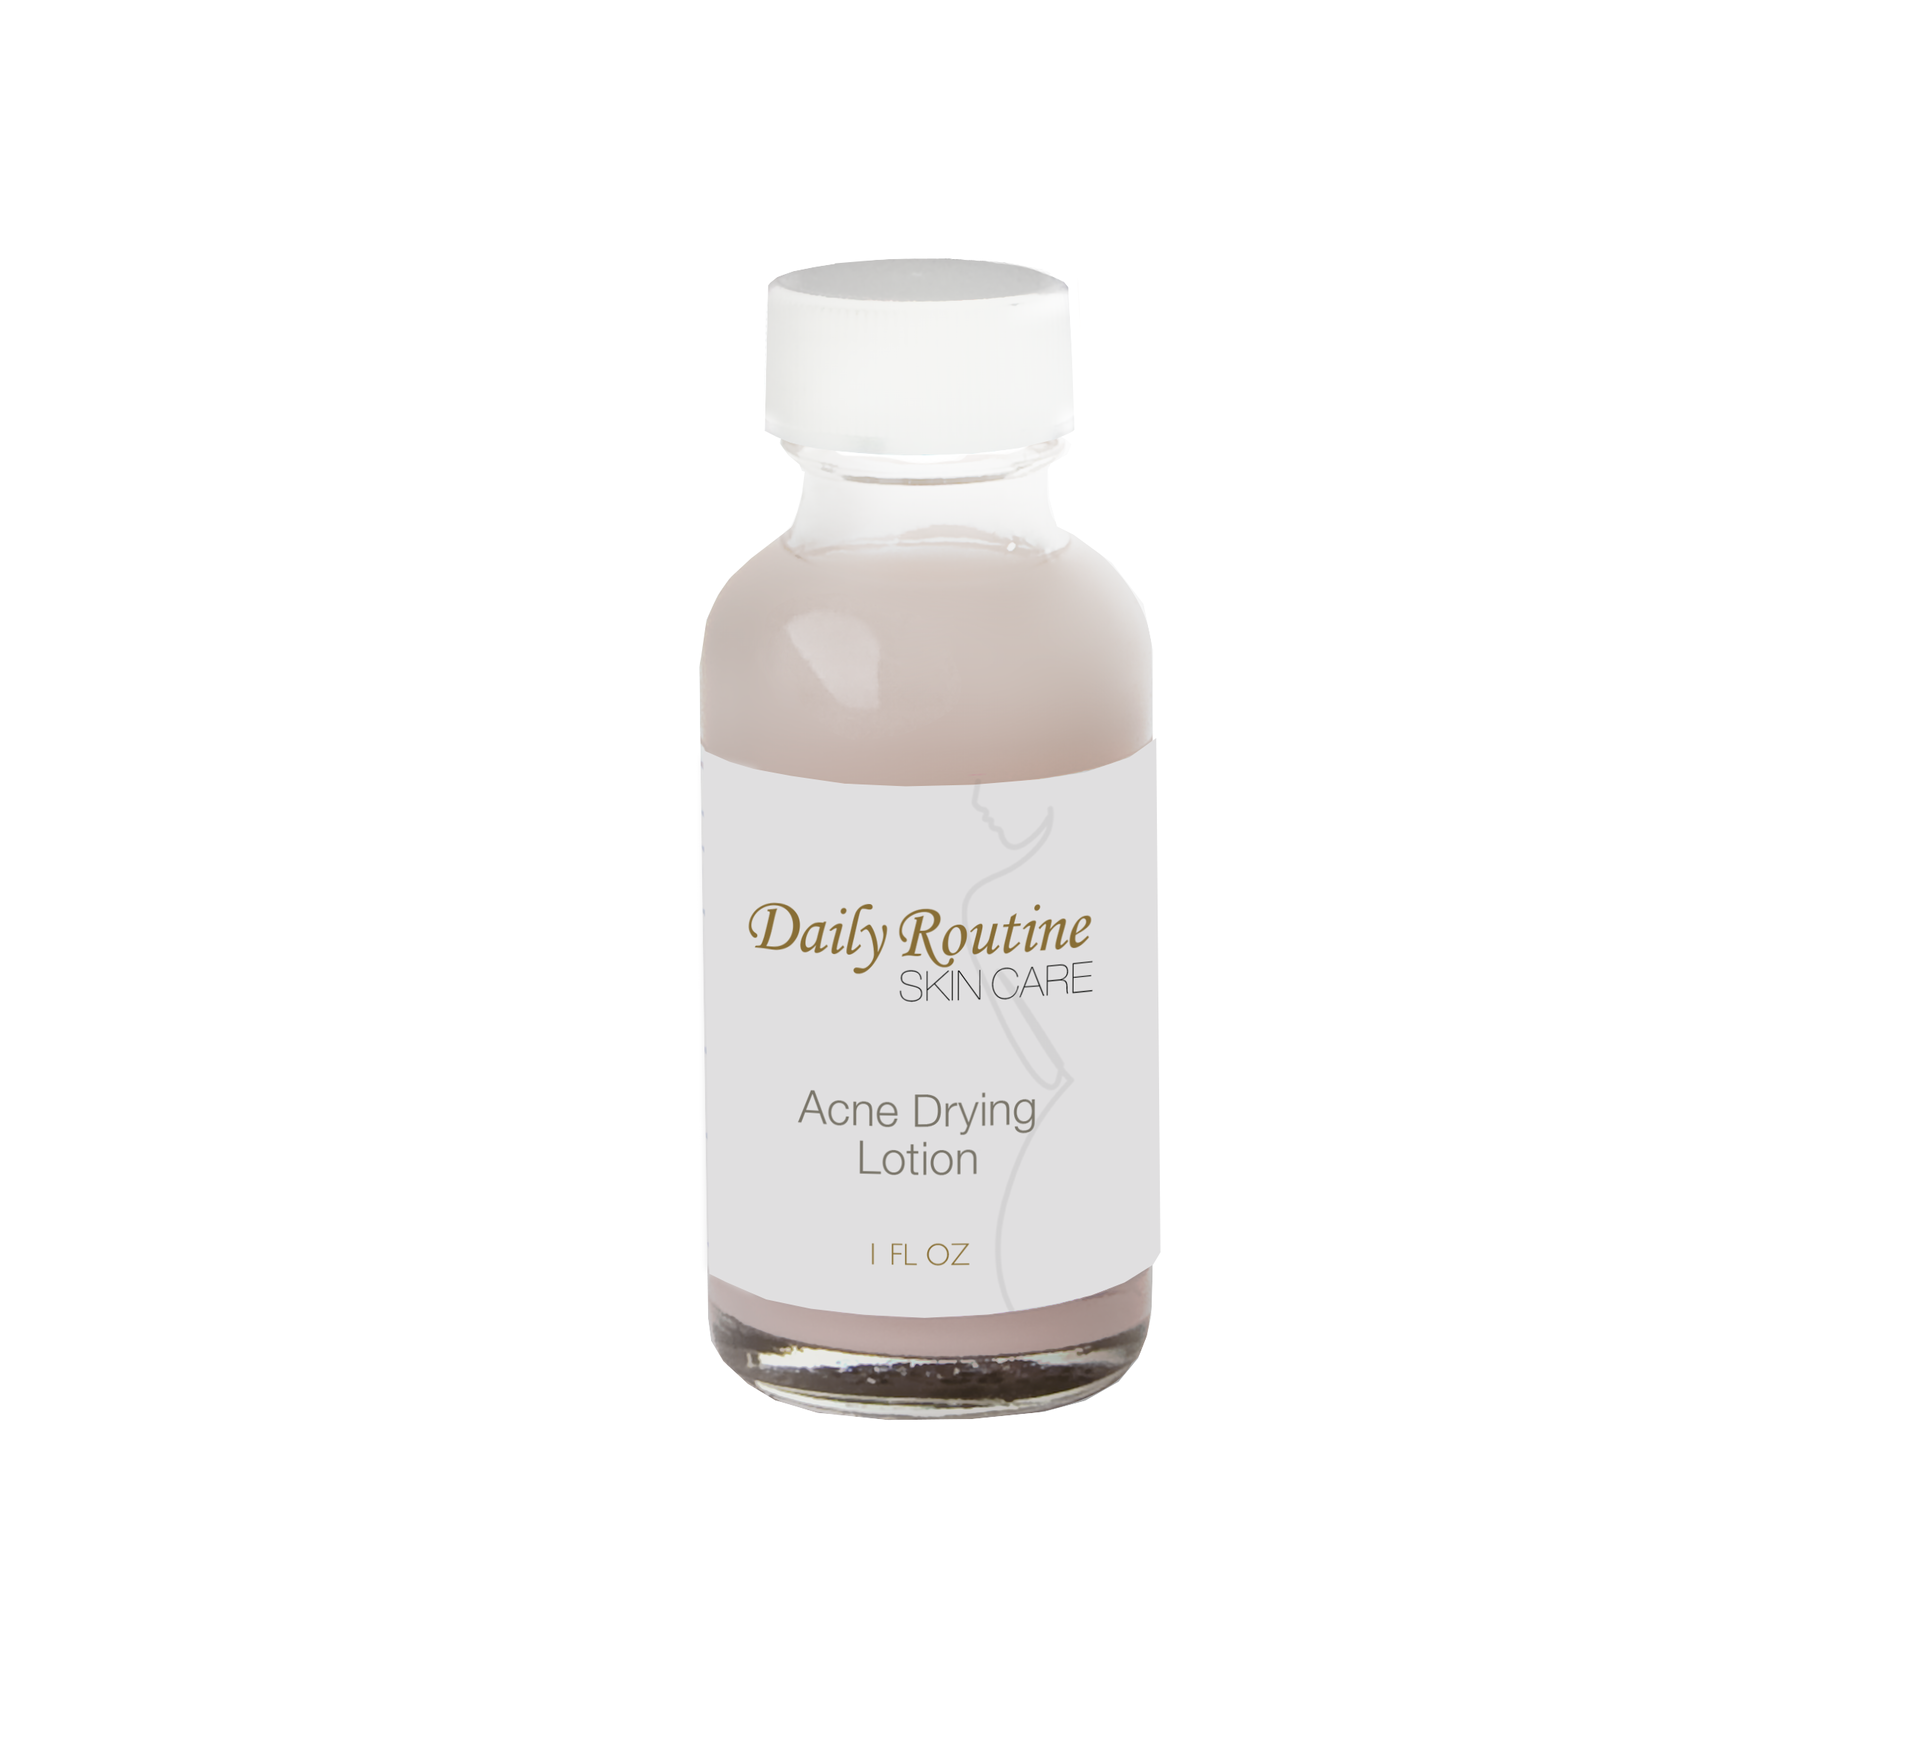 Acne Drying Lotion by Daily Routine Skin Care